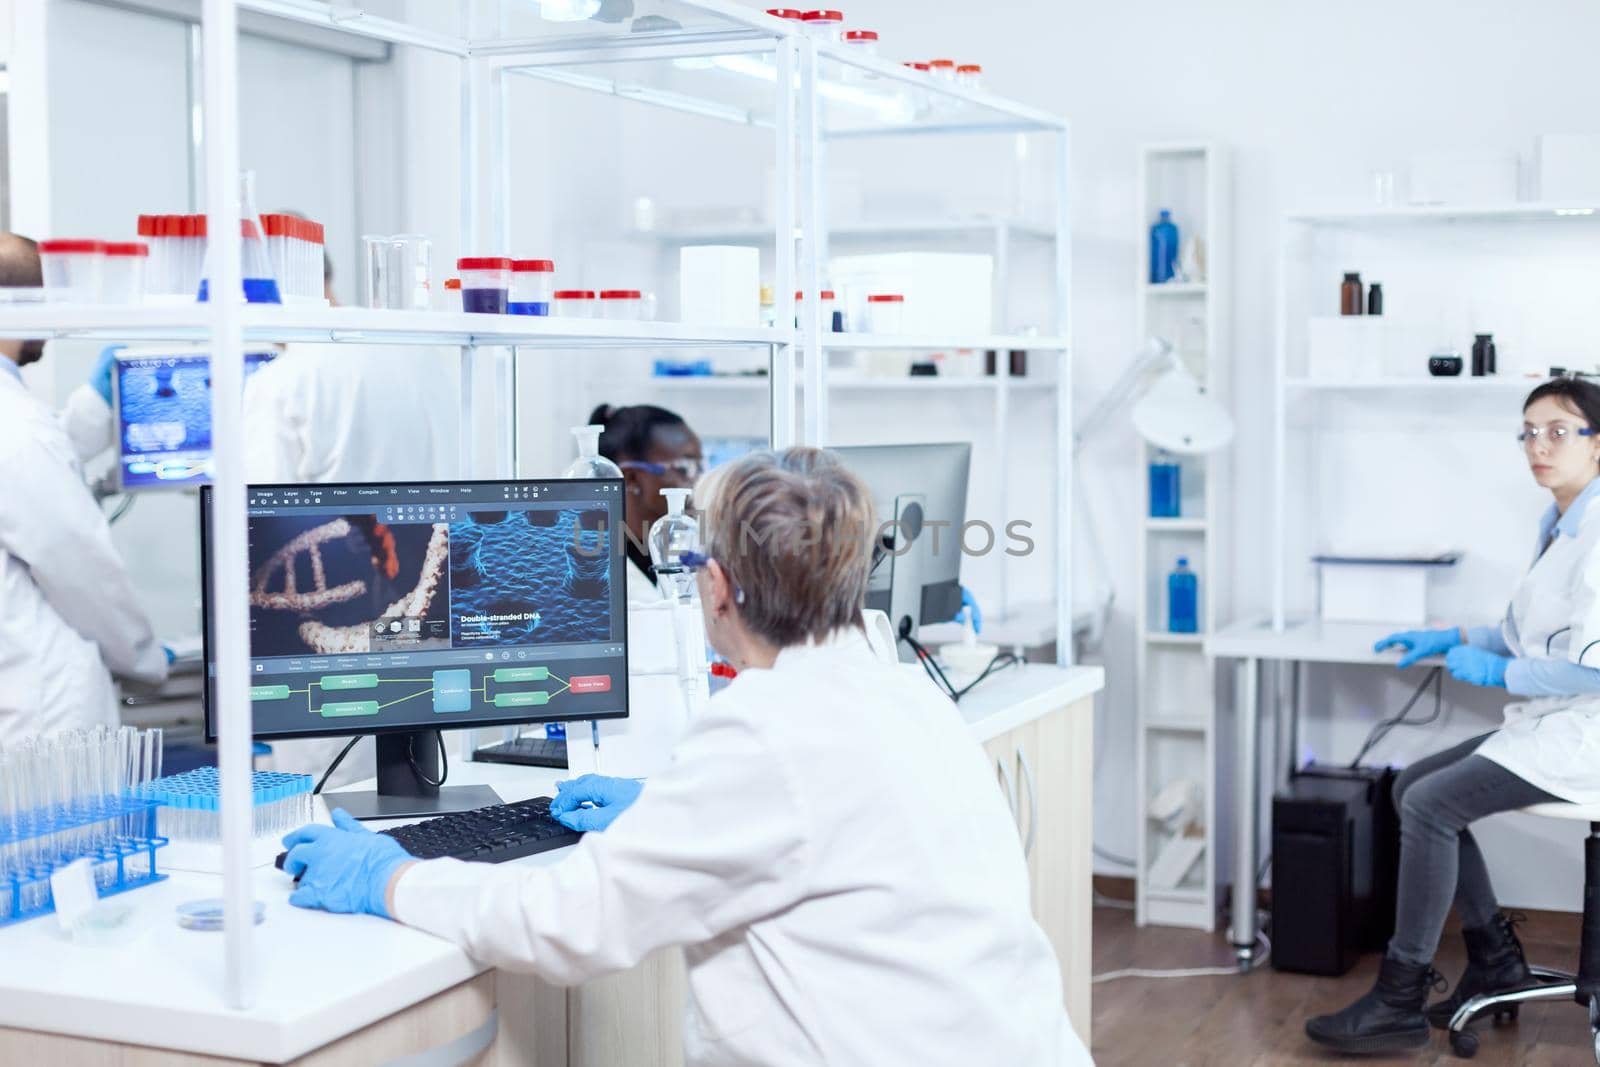 Elderly virologist working on computer with virus on display in modern facility. Senior scientist in pharmaceuticals laboratory doing genetic research wearing lab coat with team in the background.